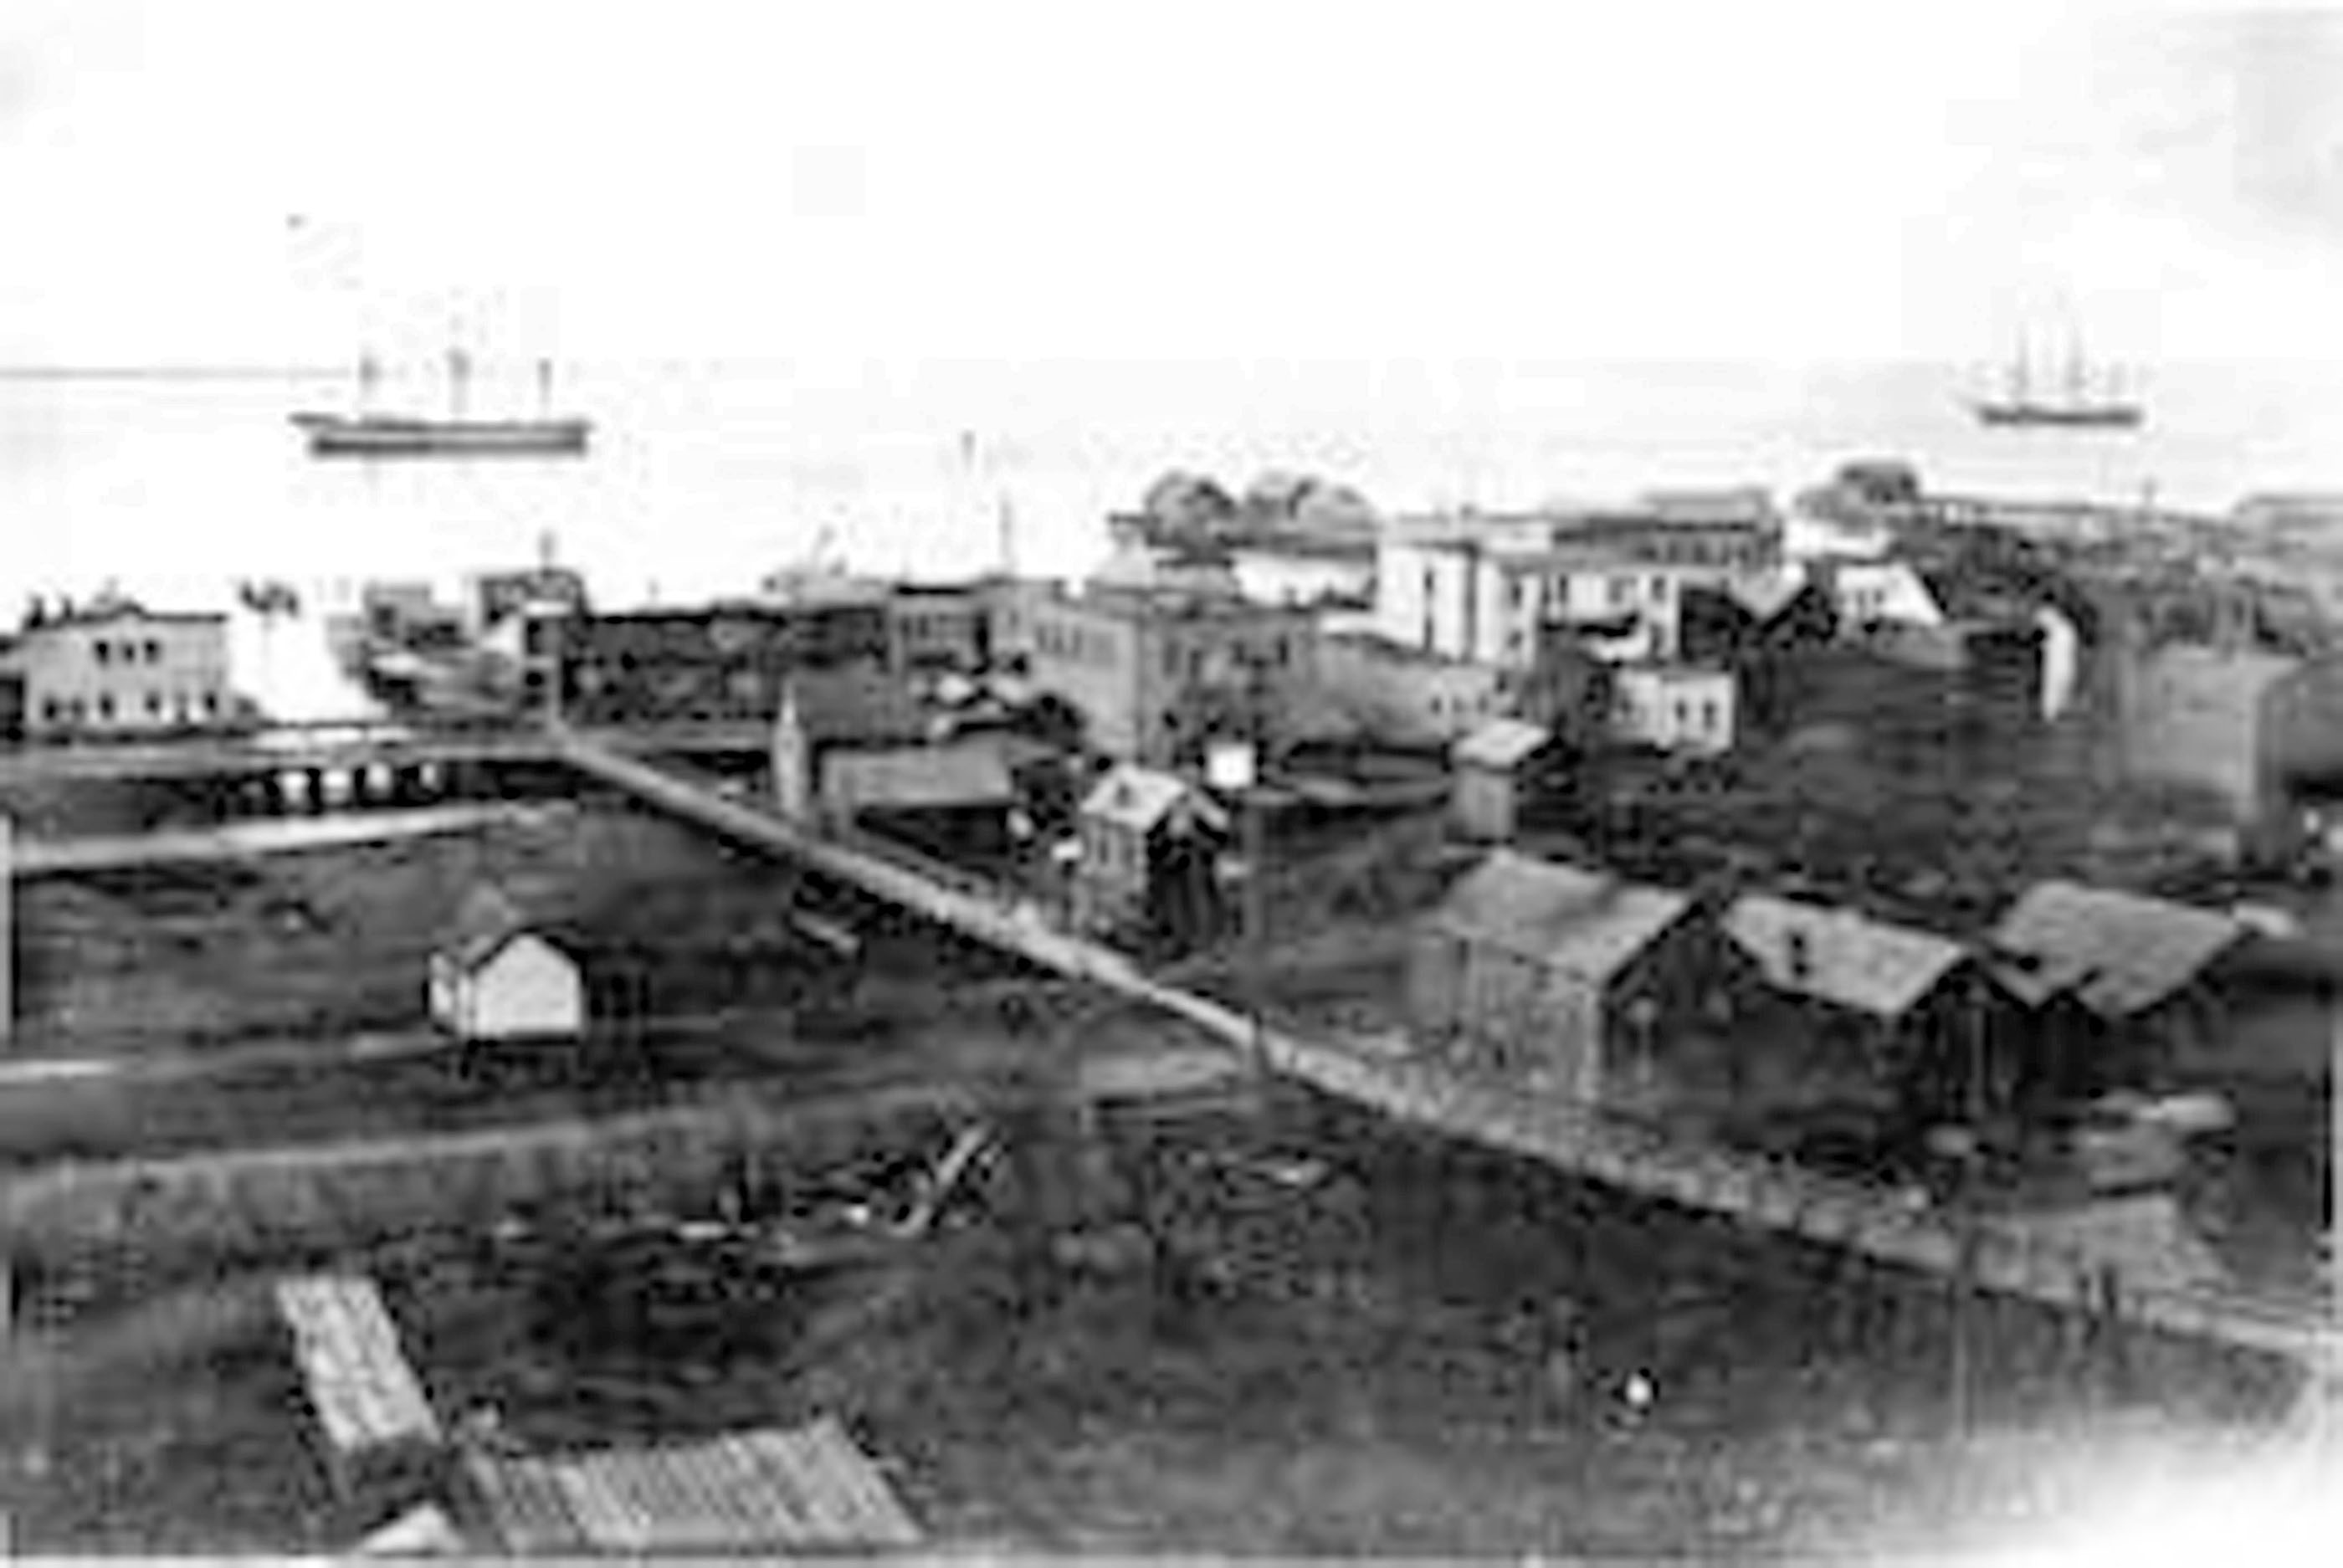 Port Angeles around the turn of the 20th century had a lot of wooden sidewalks and trestles.